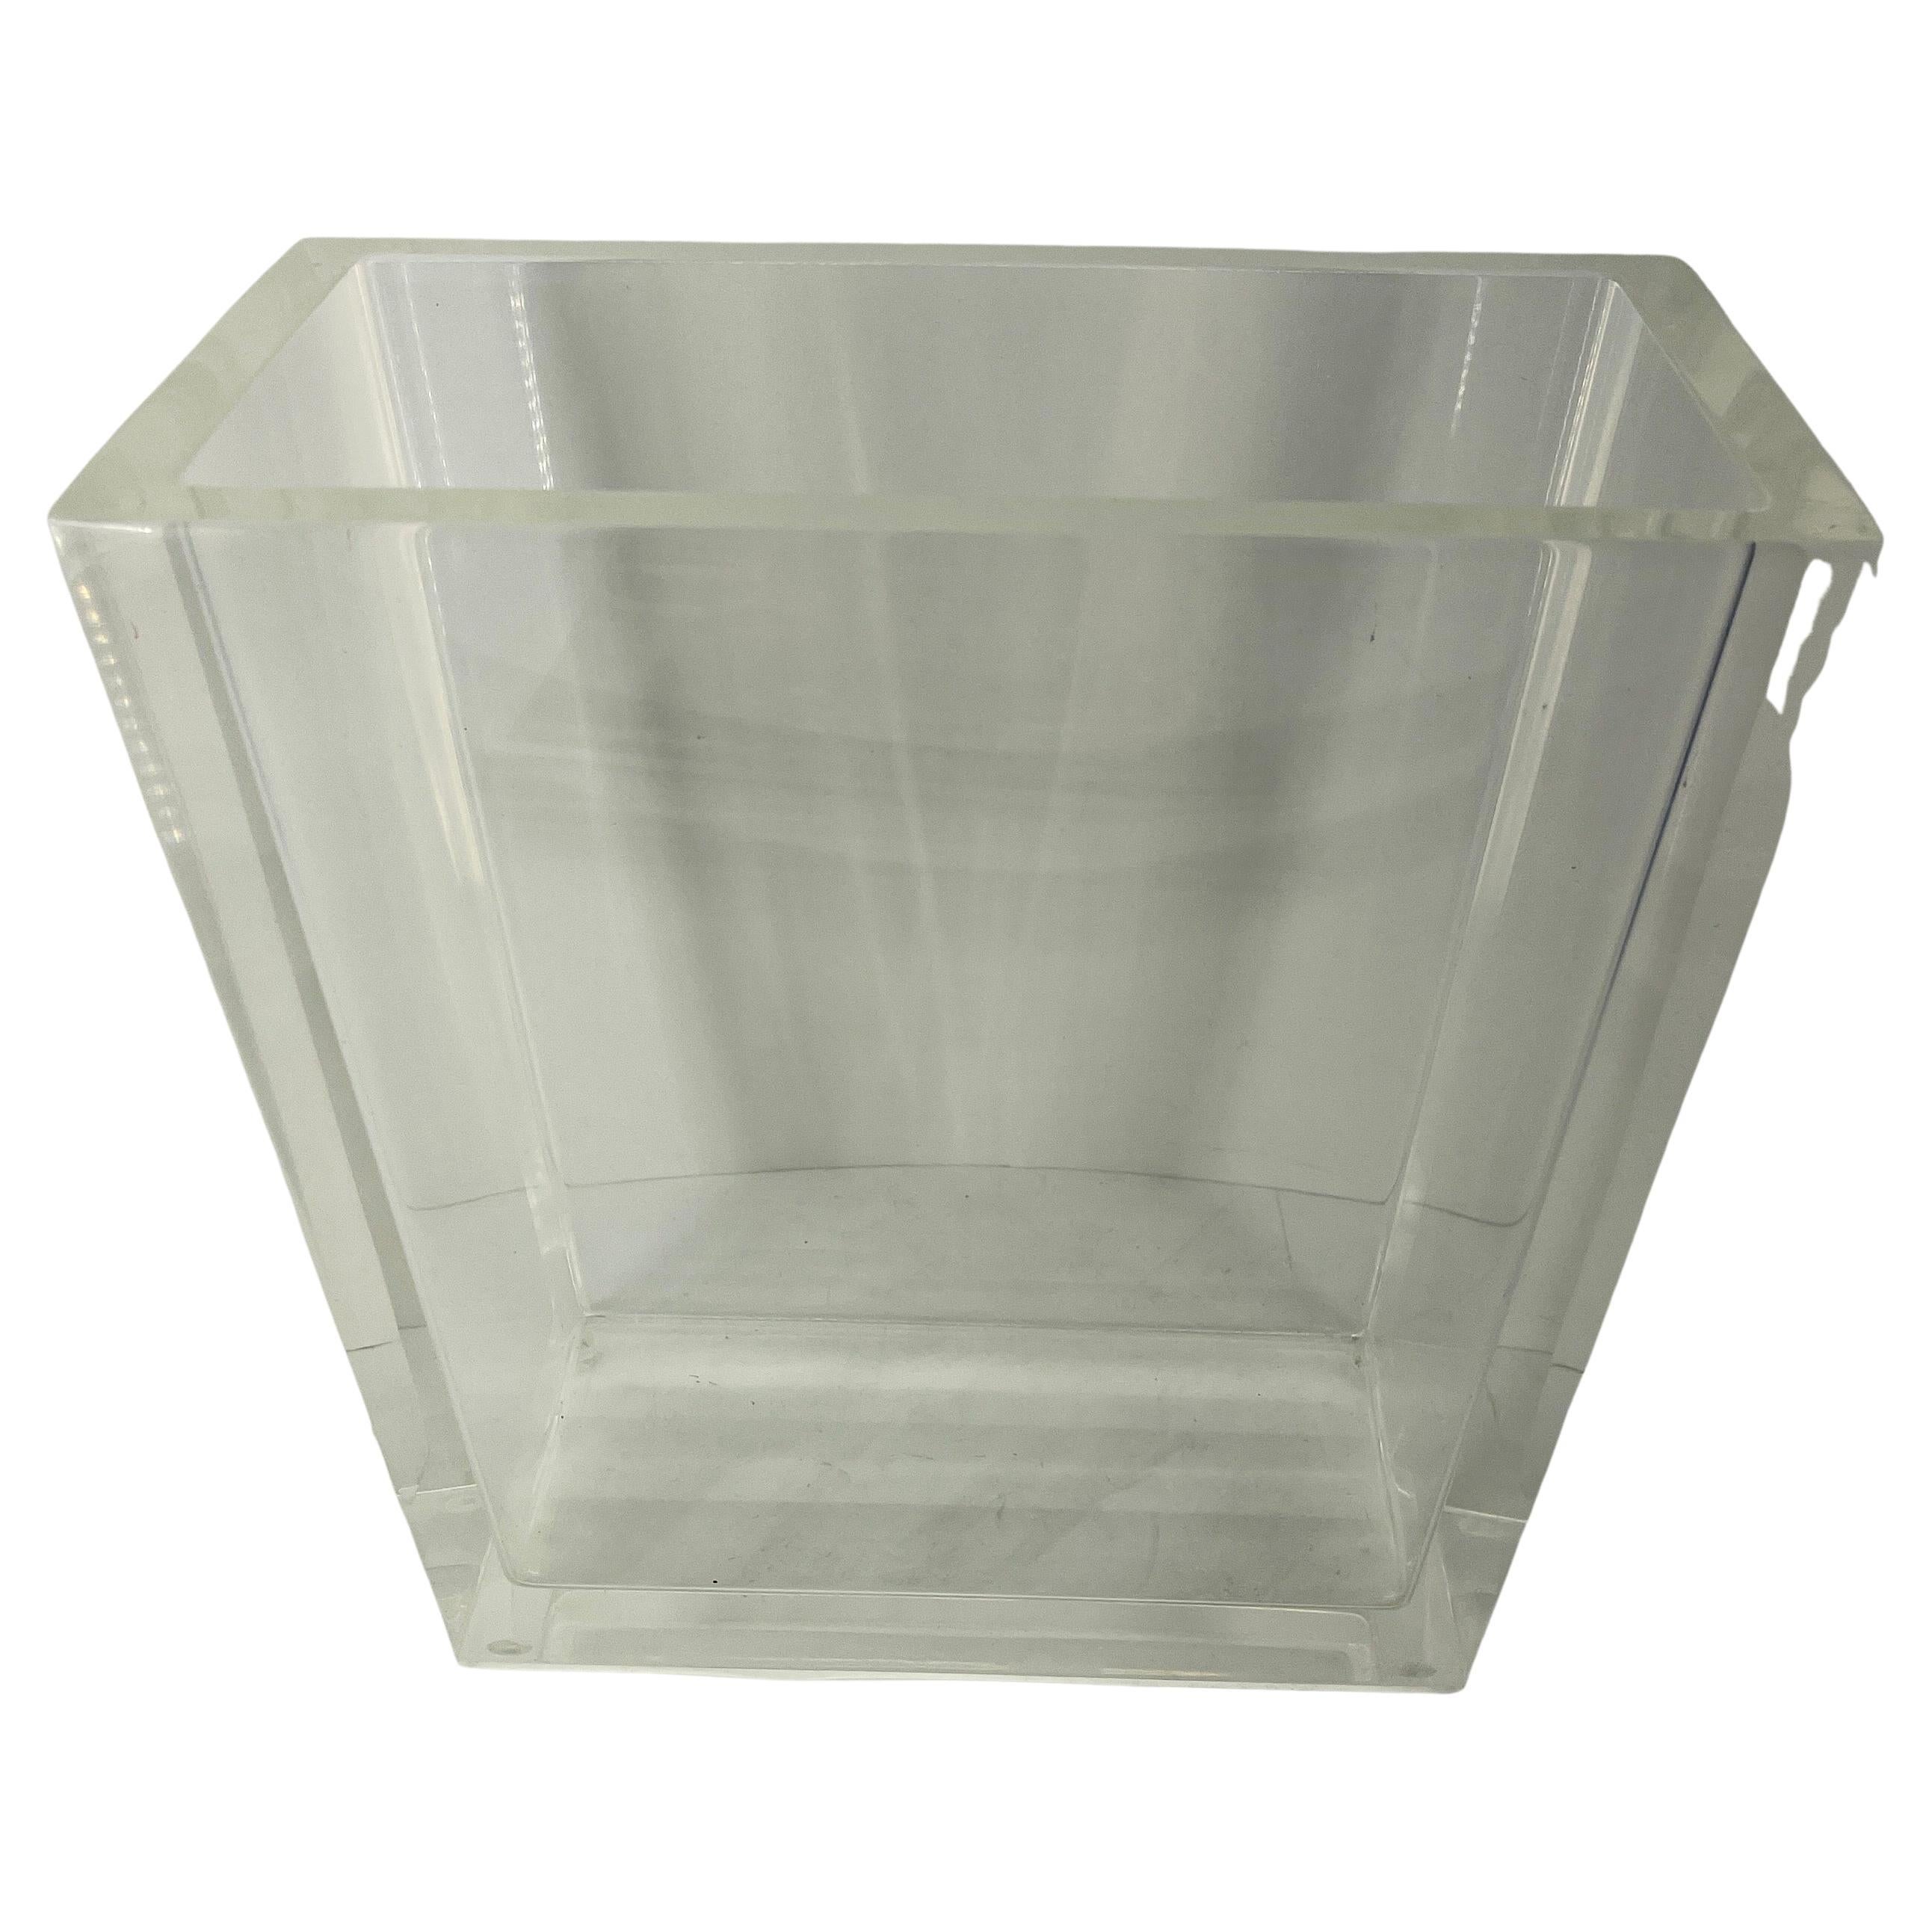 Thick Lucite Italian Magazine Rack Trash Can, Mid-Century Modern In Good Condition For Sale In Haddonfield, NJ